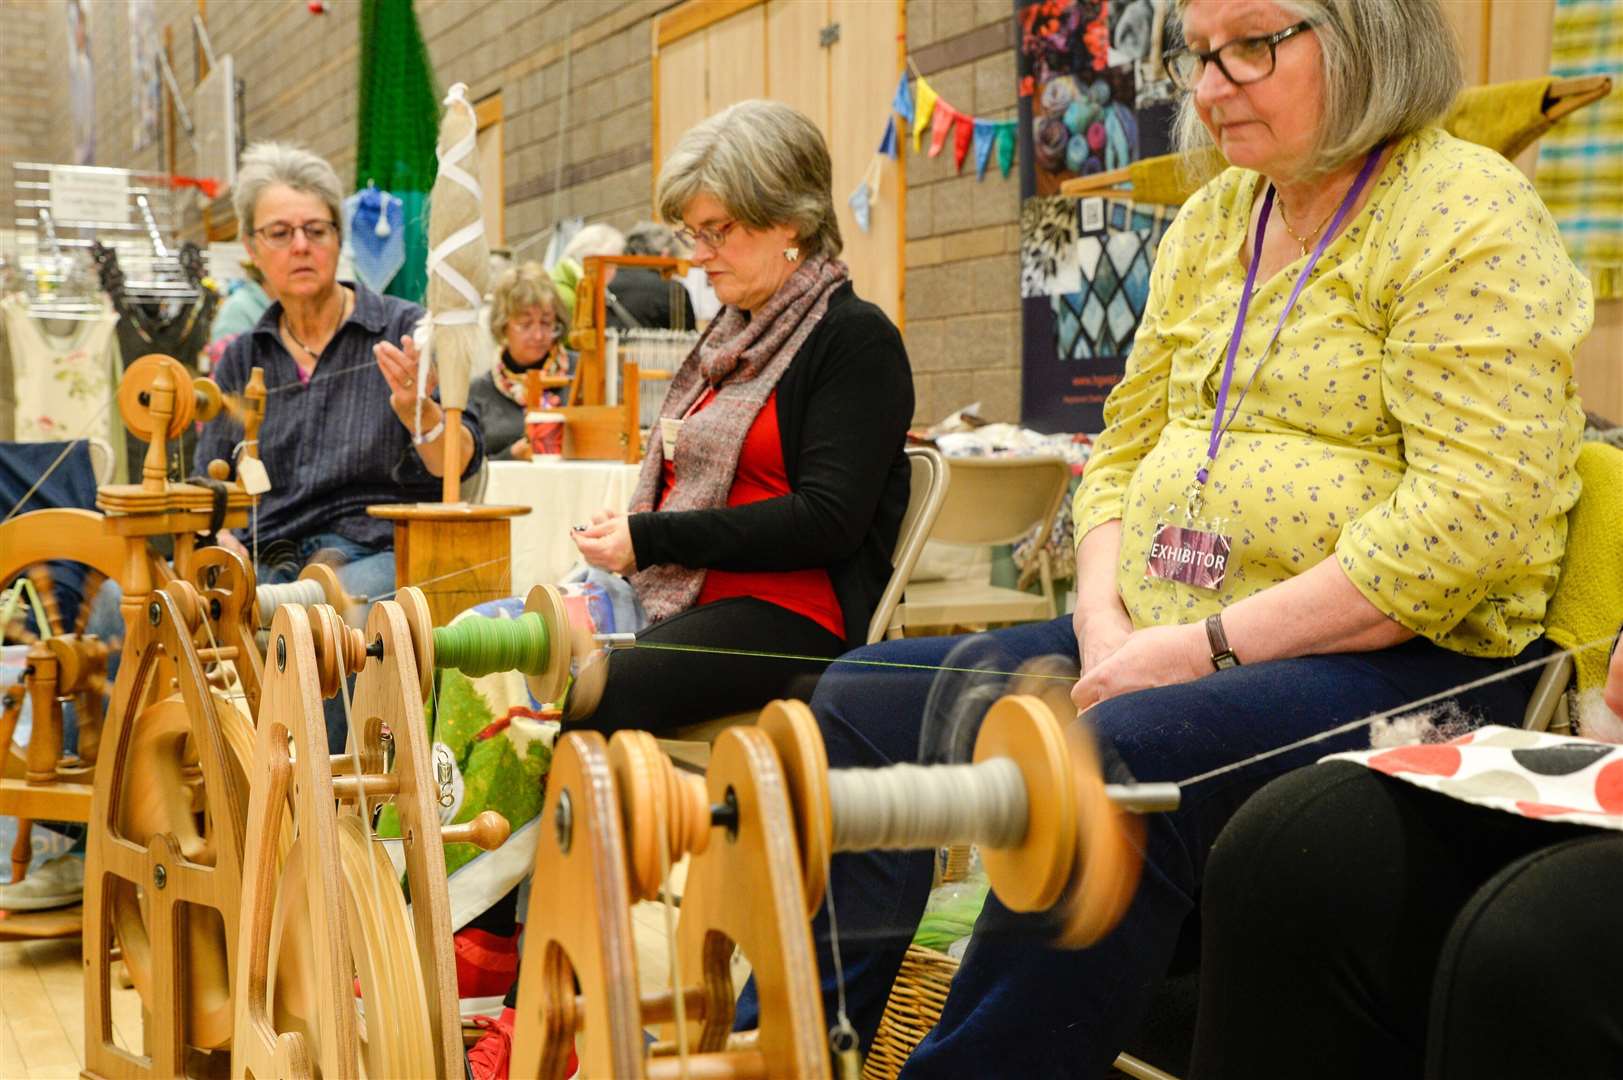 Loch Ness Knit Fest is a chance to learn new skills.